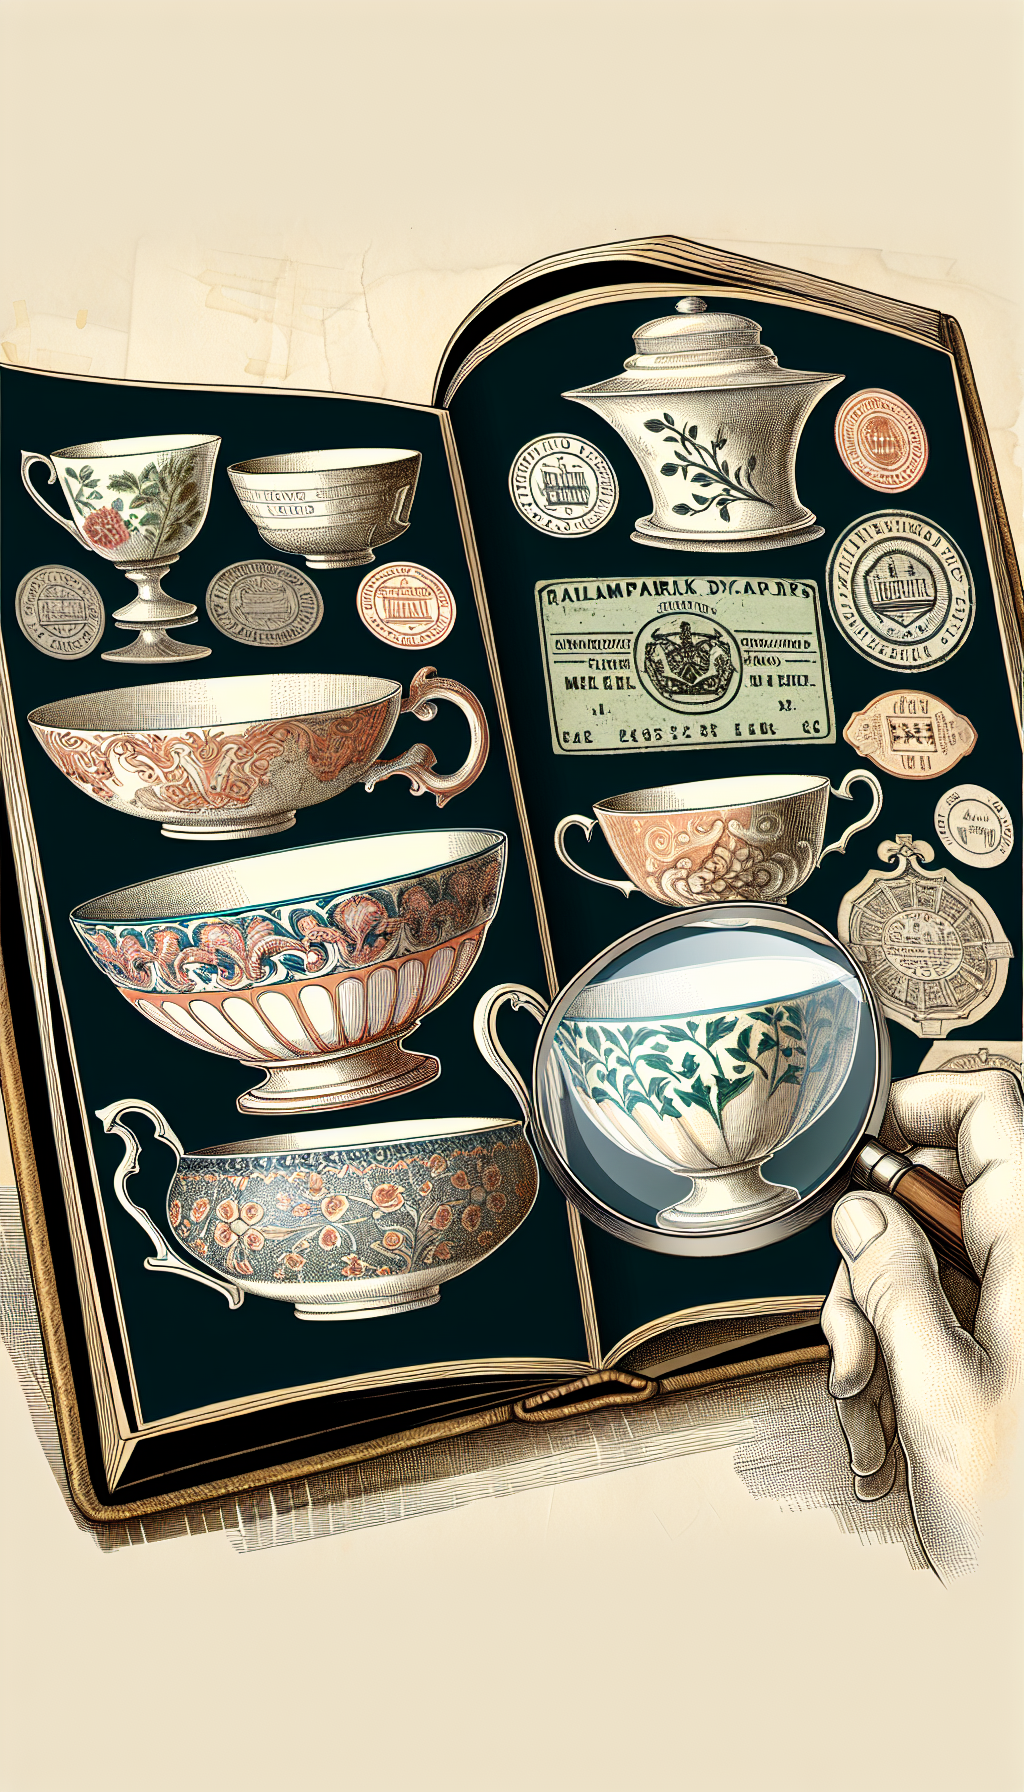 An illustration featuring an array of antique tea cups, each with distinct, intricate patterns circling their curves, rests atop an open, magnifying glass-clutched book with ghosted images of hallmark symbols and maker's marks. The cups are styled in various artistic techniques—watercolor, line art, and stippling—representing the visual lexicon to be deciphered by the marks and motifs beneath the translucent page overlay.